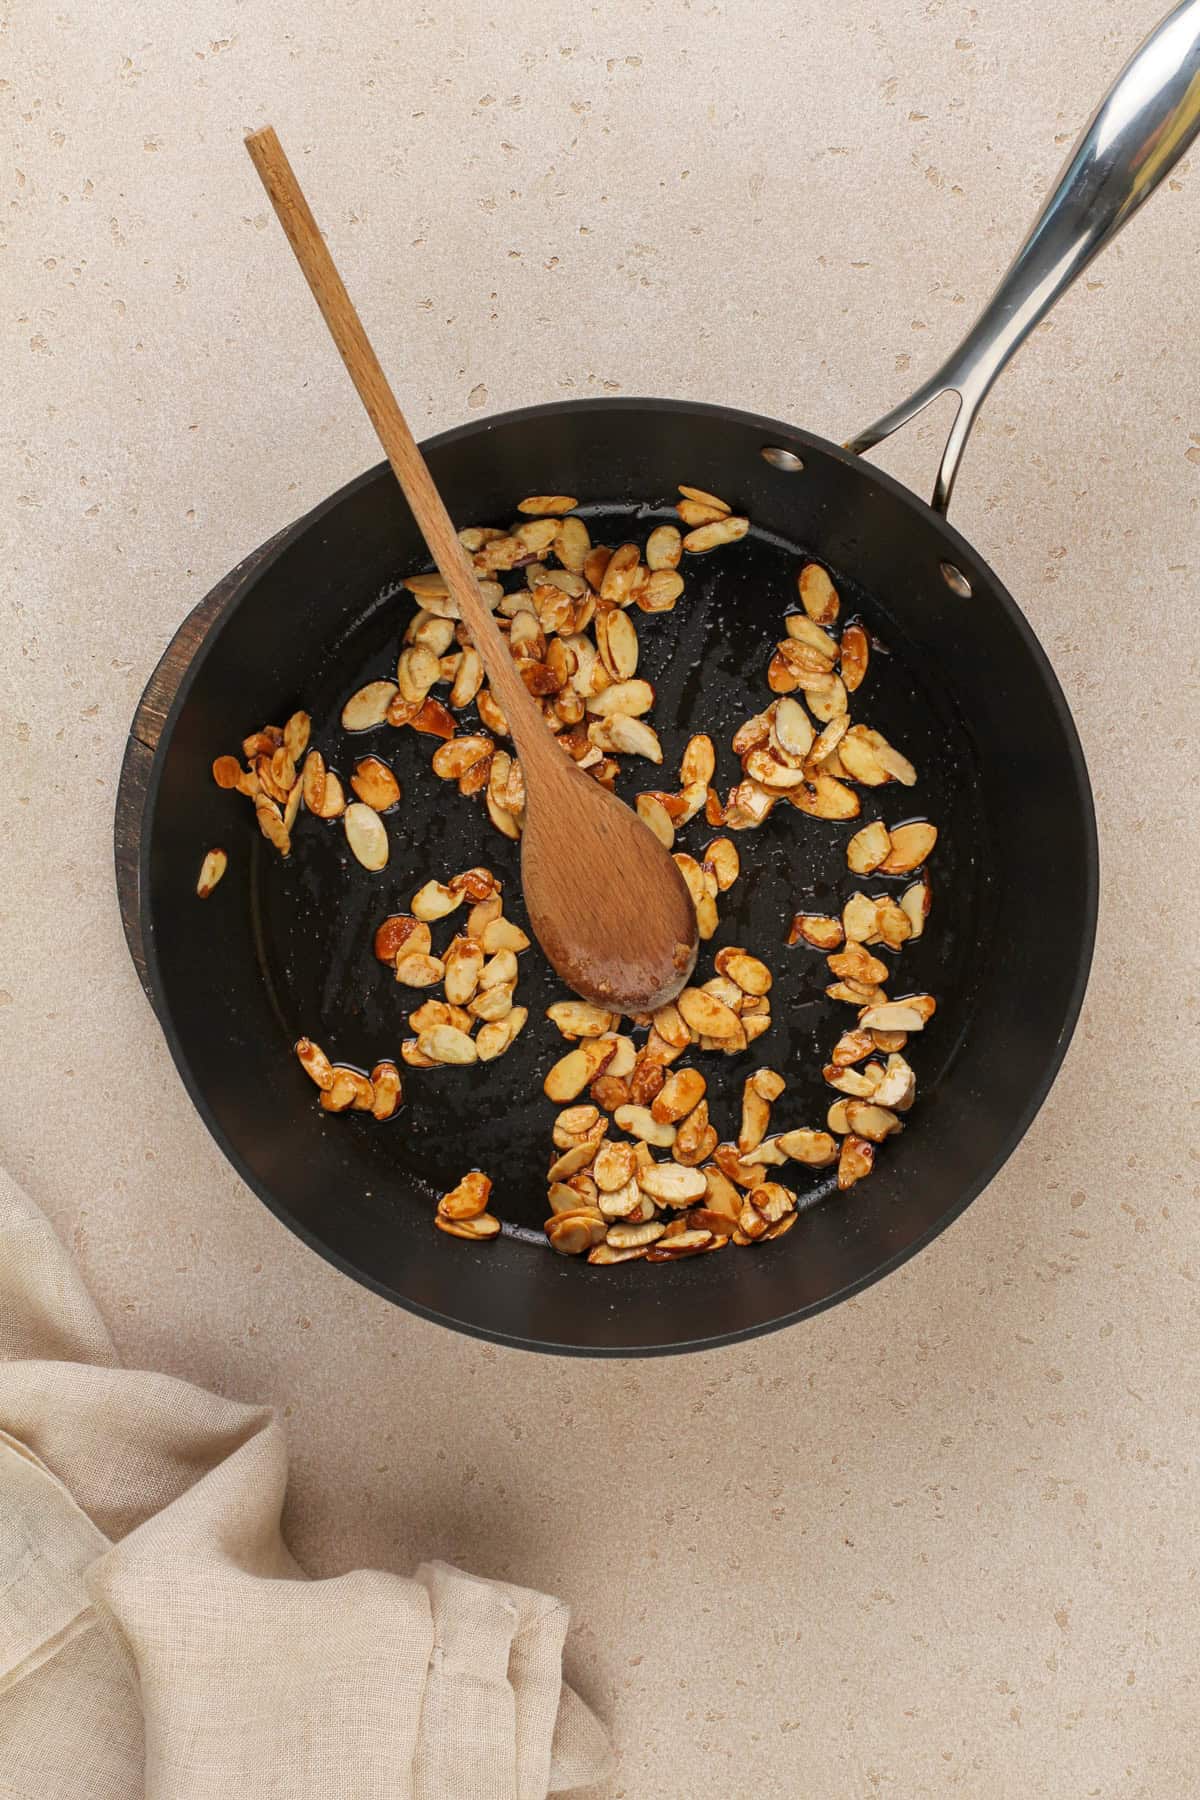 Almonds being caramelized in a nonstick pan.